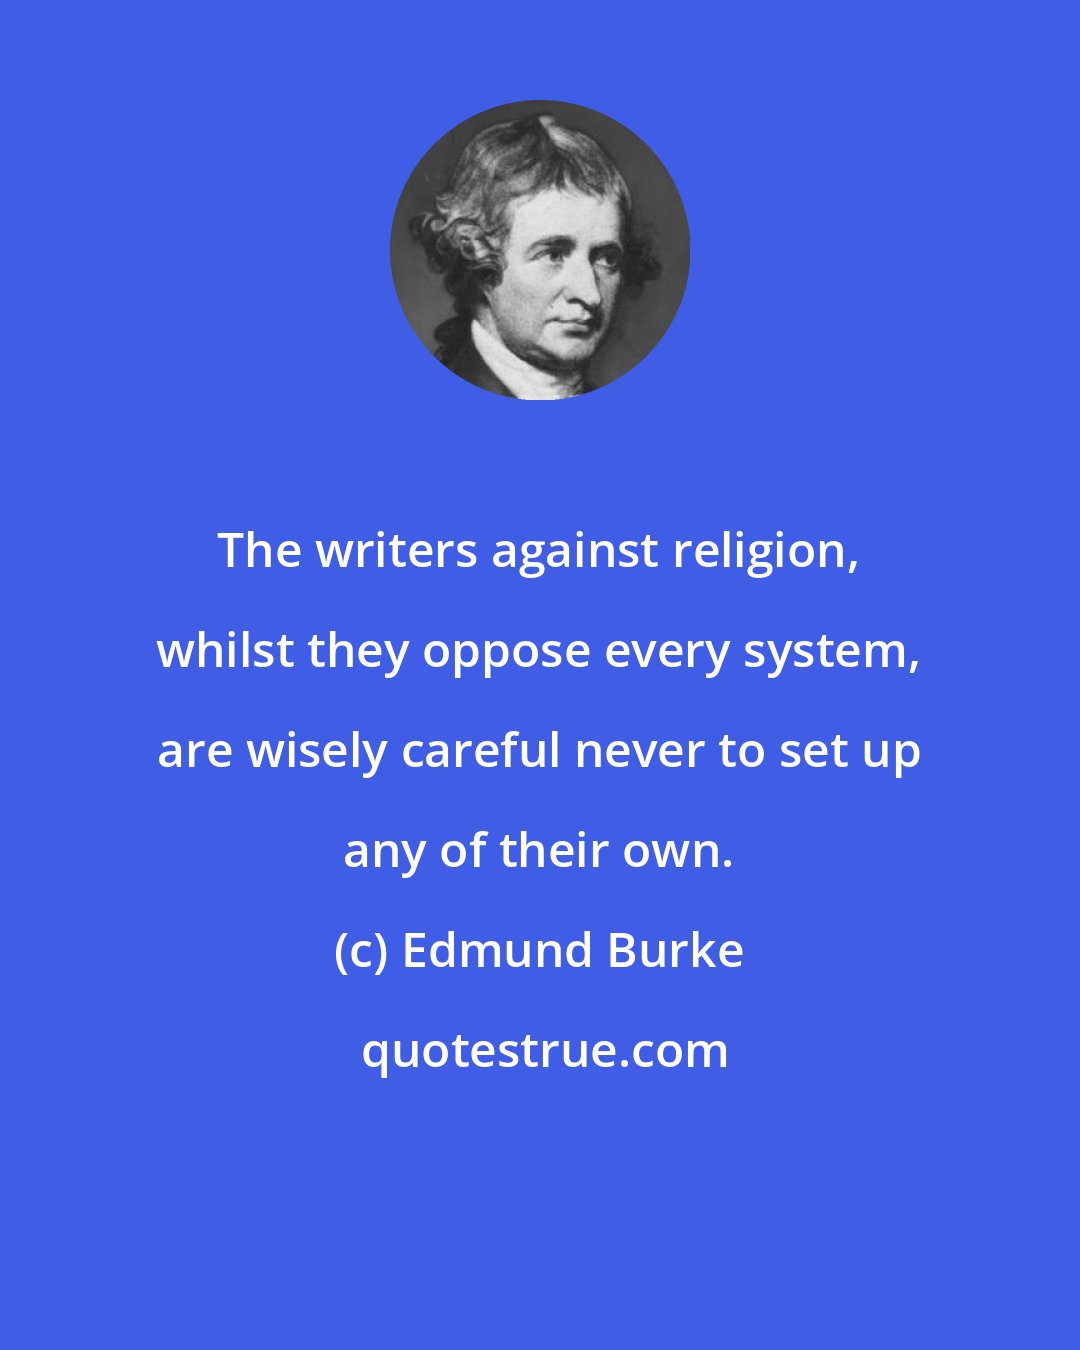 Edmund Burke: The writers against religion, whilst they oppose every system, are wisely careful never to set up any of their own.